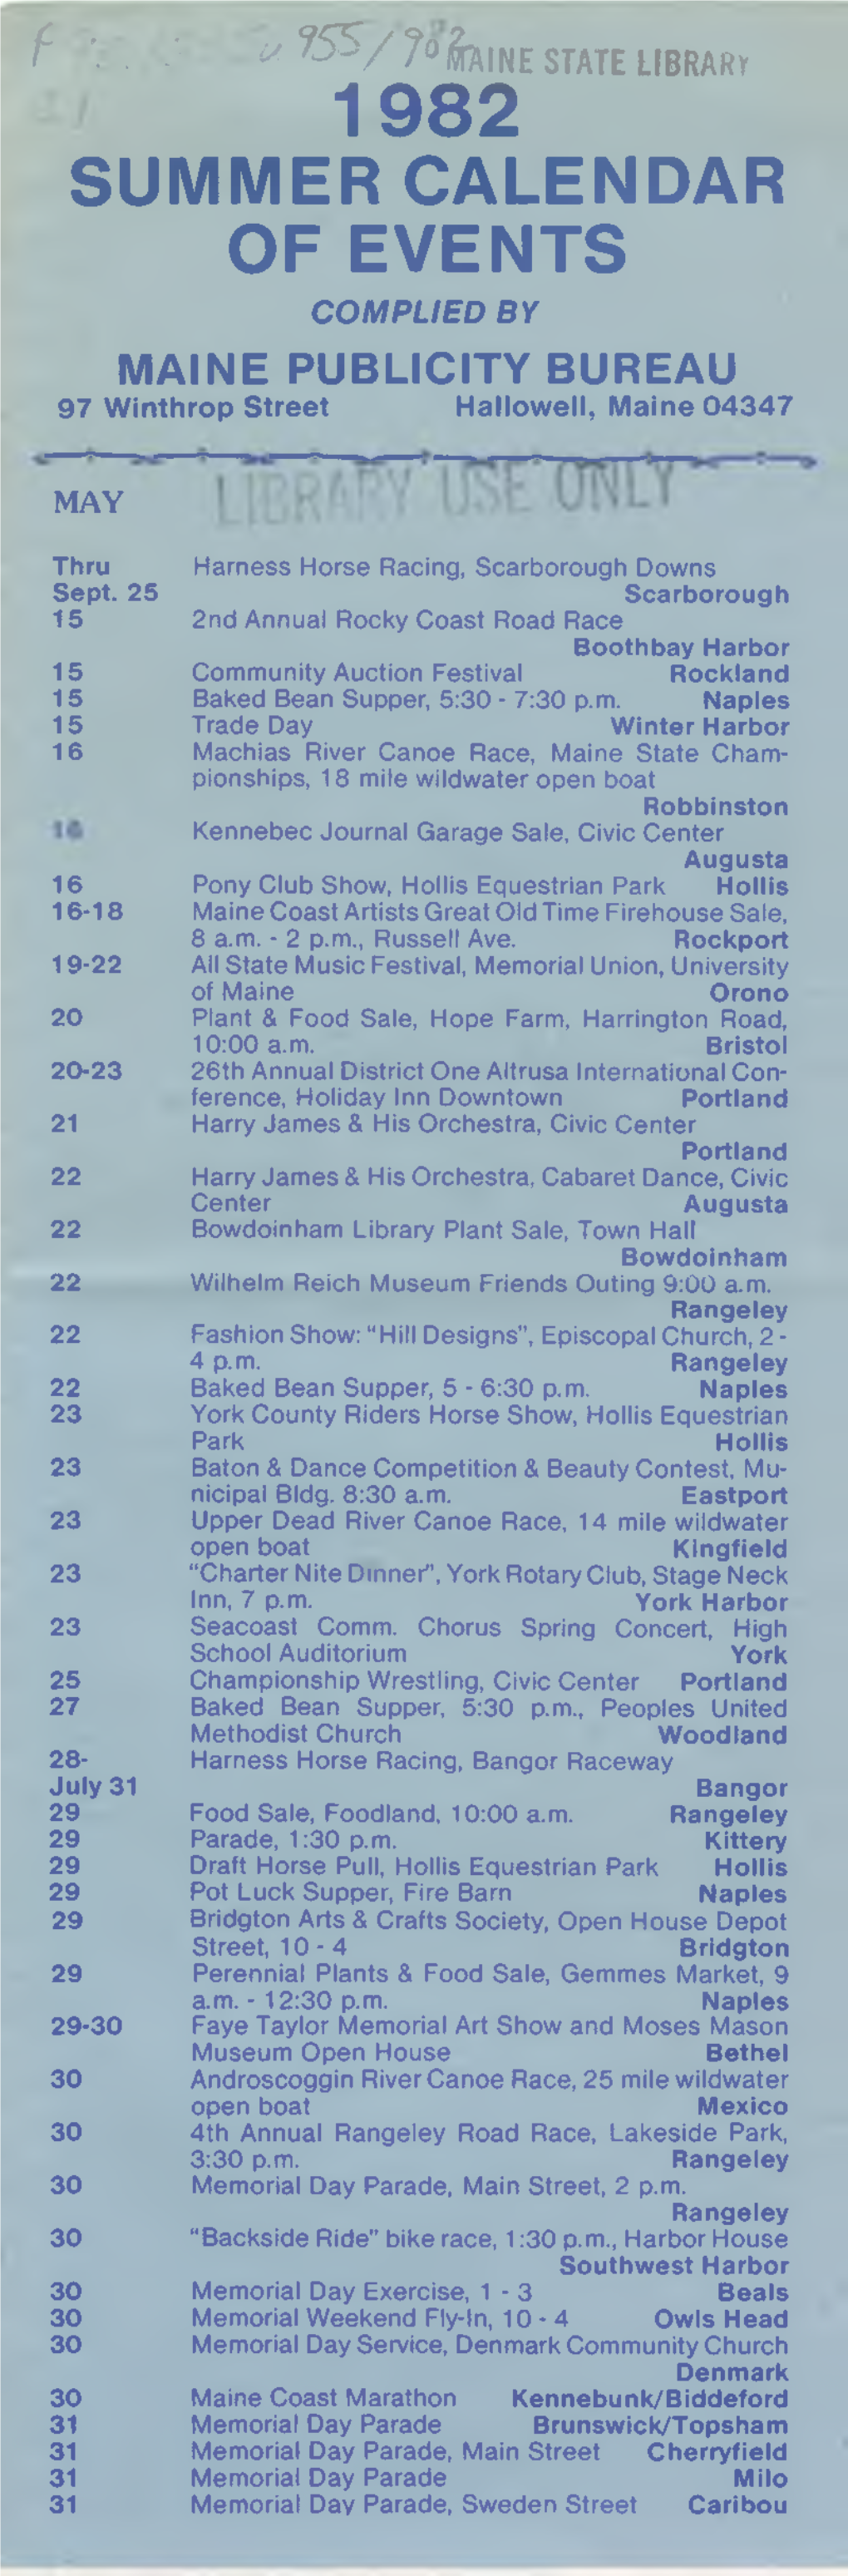 Maine Summer Calender of Events 1982